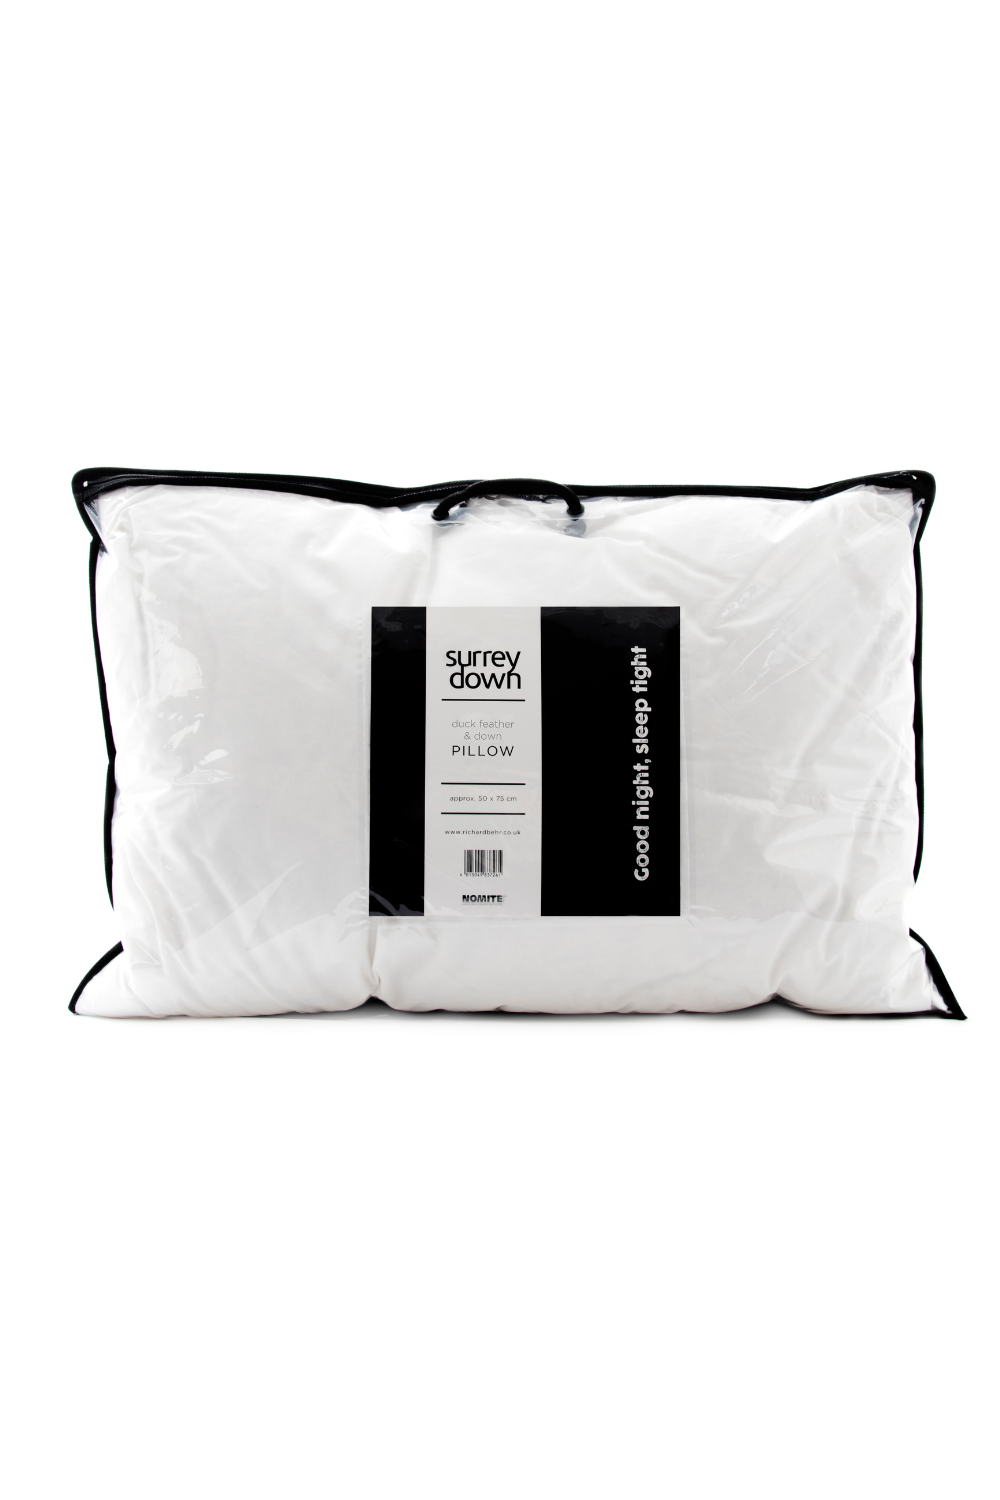 Surrey Down Duck Feather and Down Medium Firmness Pillow